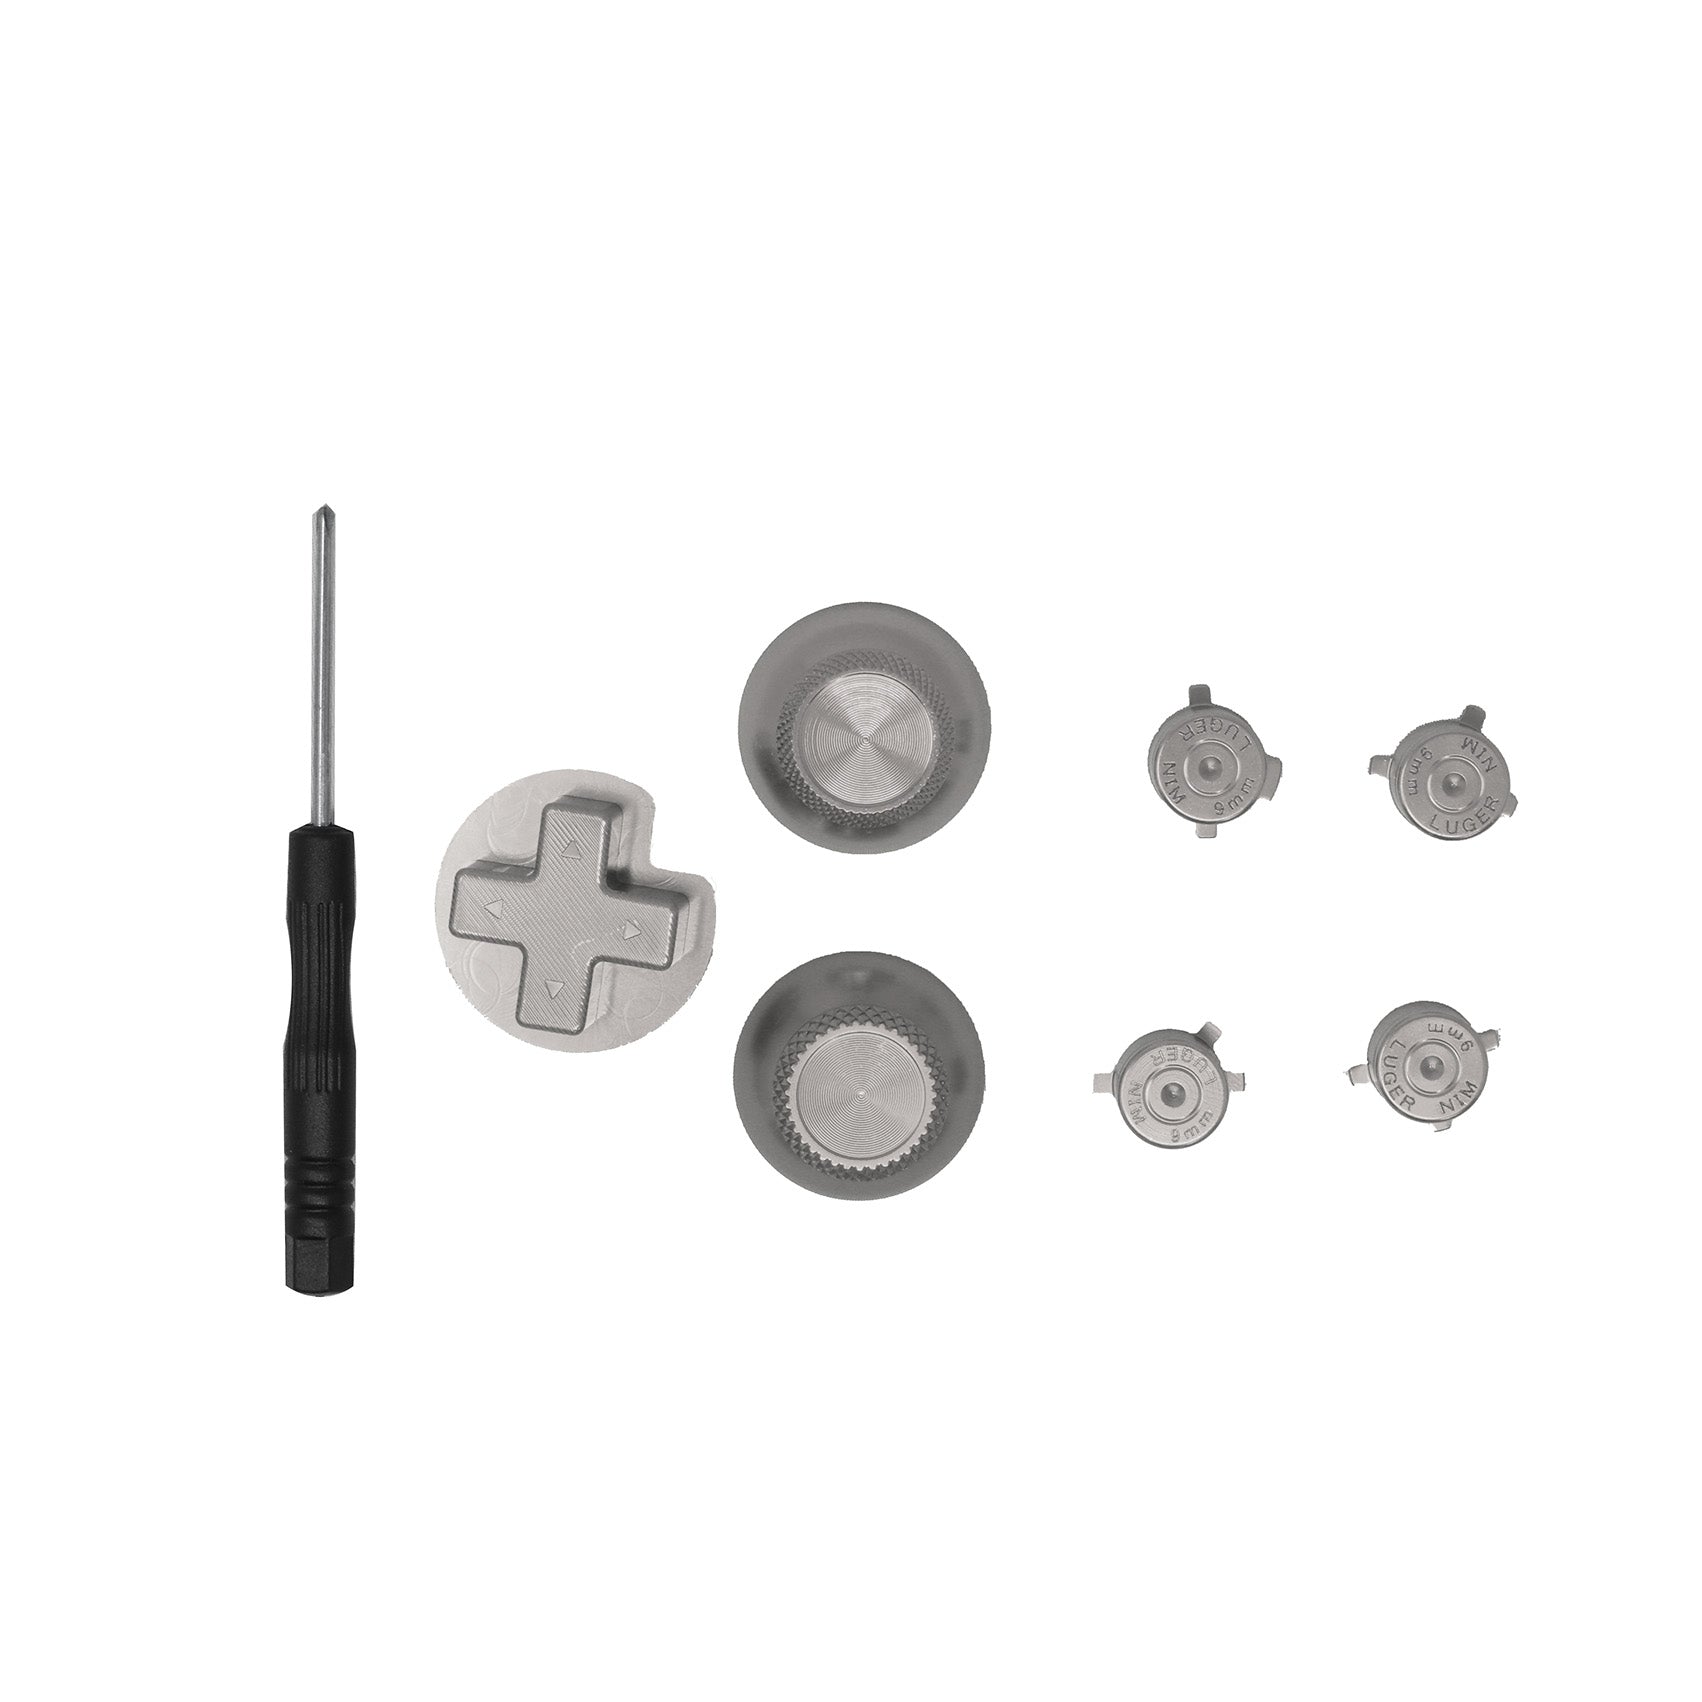 Metal Thumbstick and Button Set for Switch Pro Controller Aliexpress